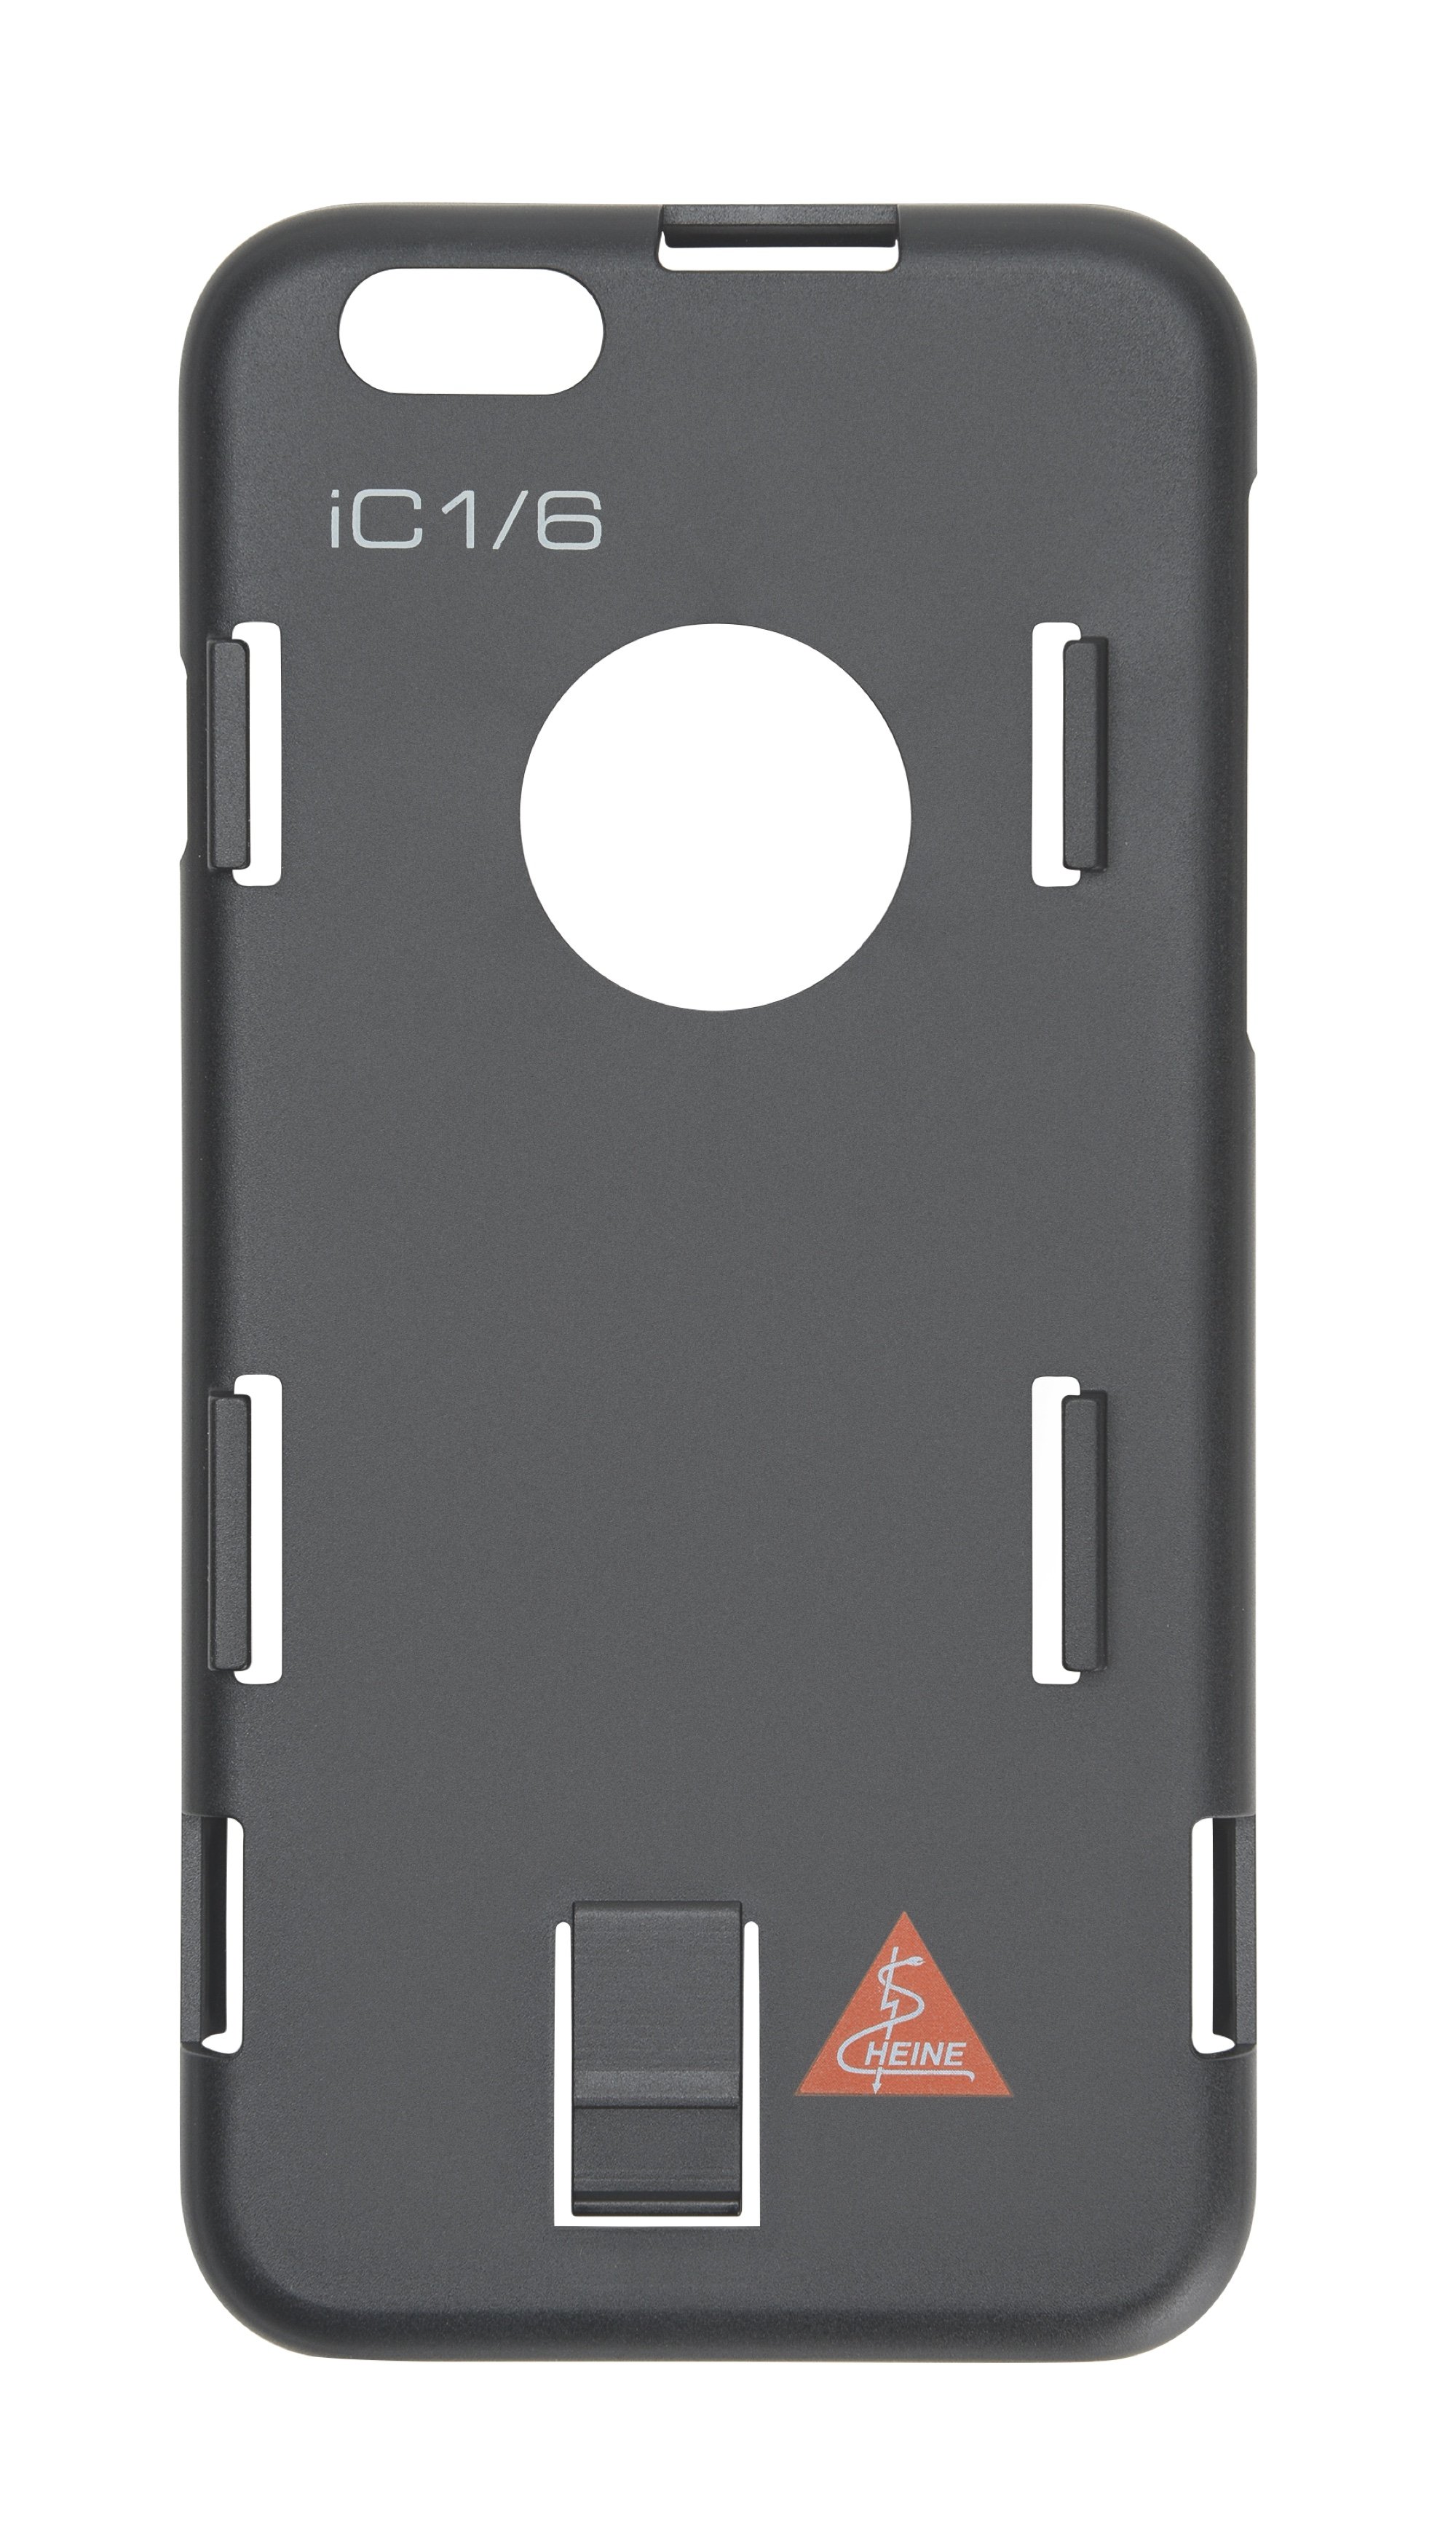 HEINE iC 1 Mounting Case for iPhone 6/6s